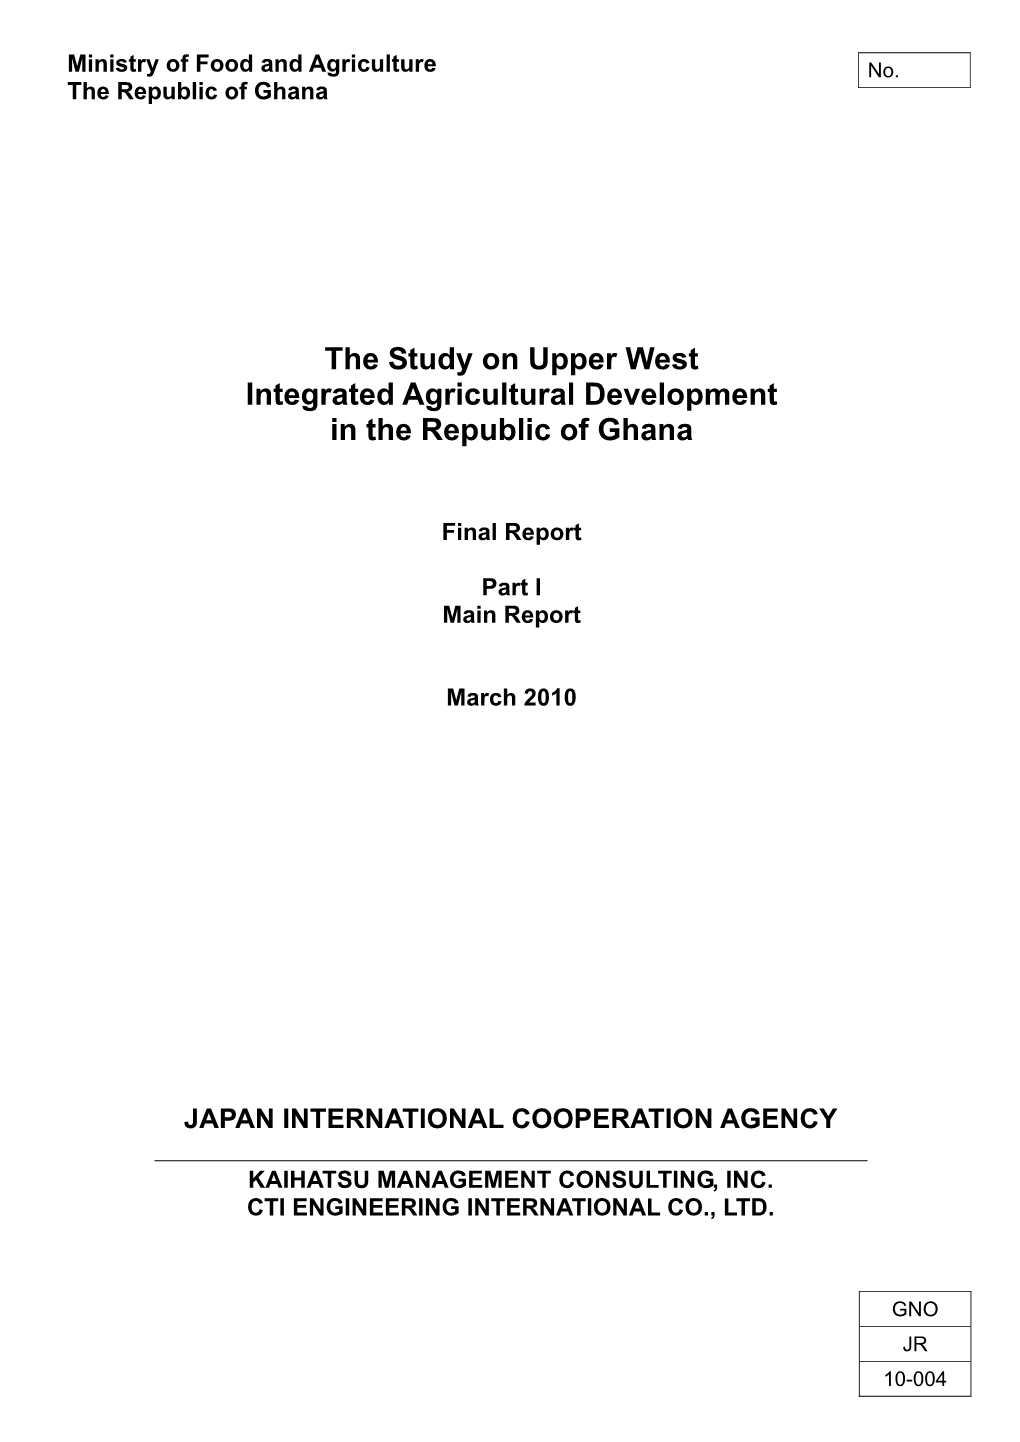 The Study on Upper West Integrated Agricultural Development in the Republic of Ghana